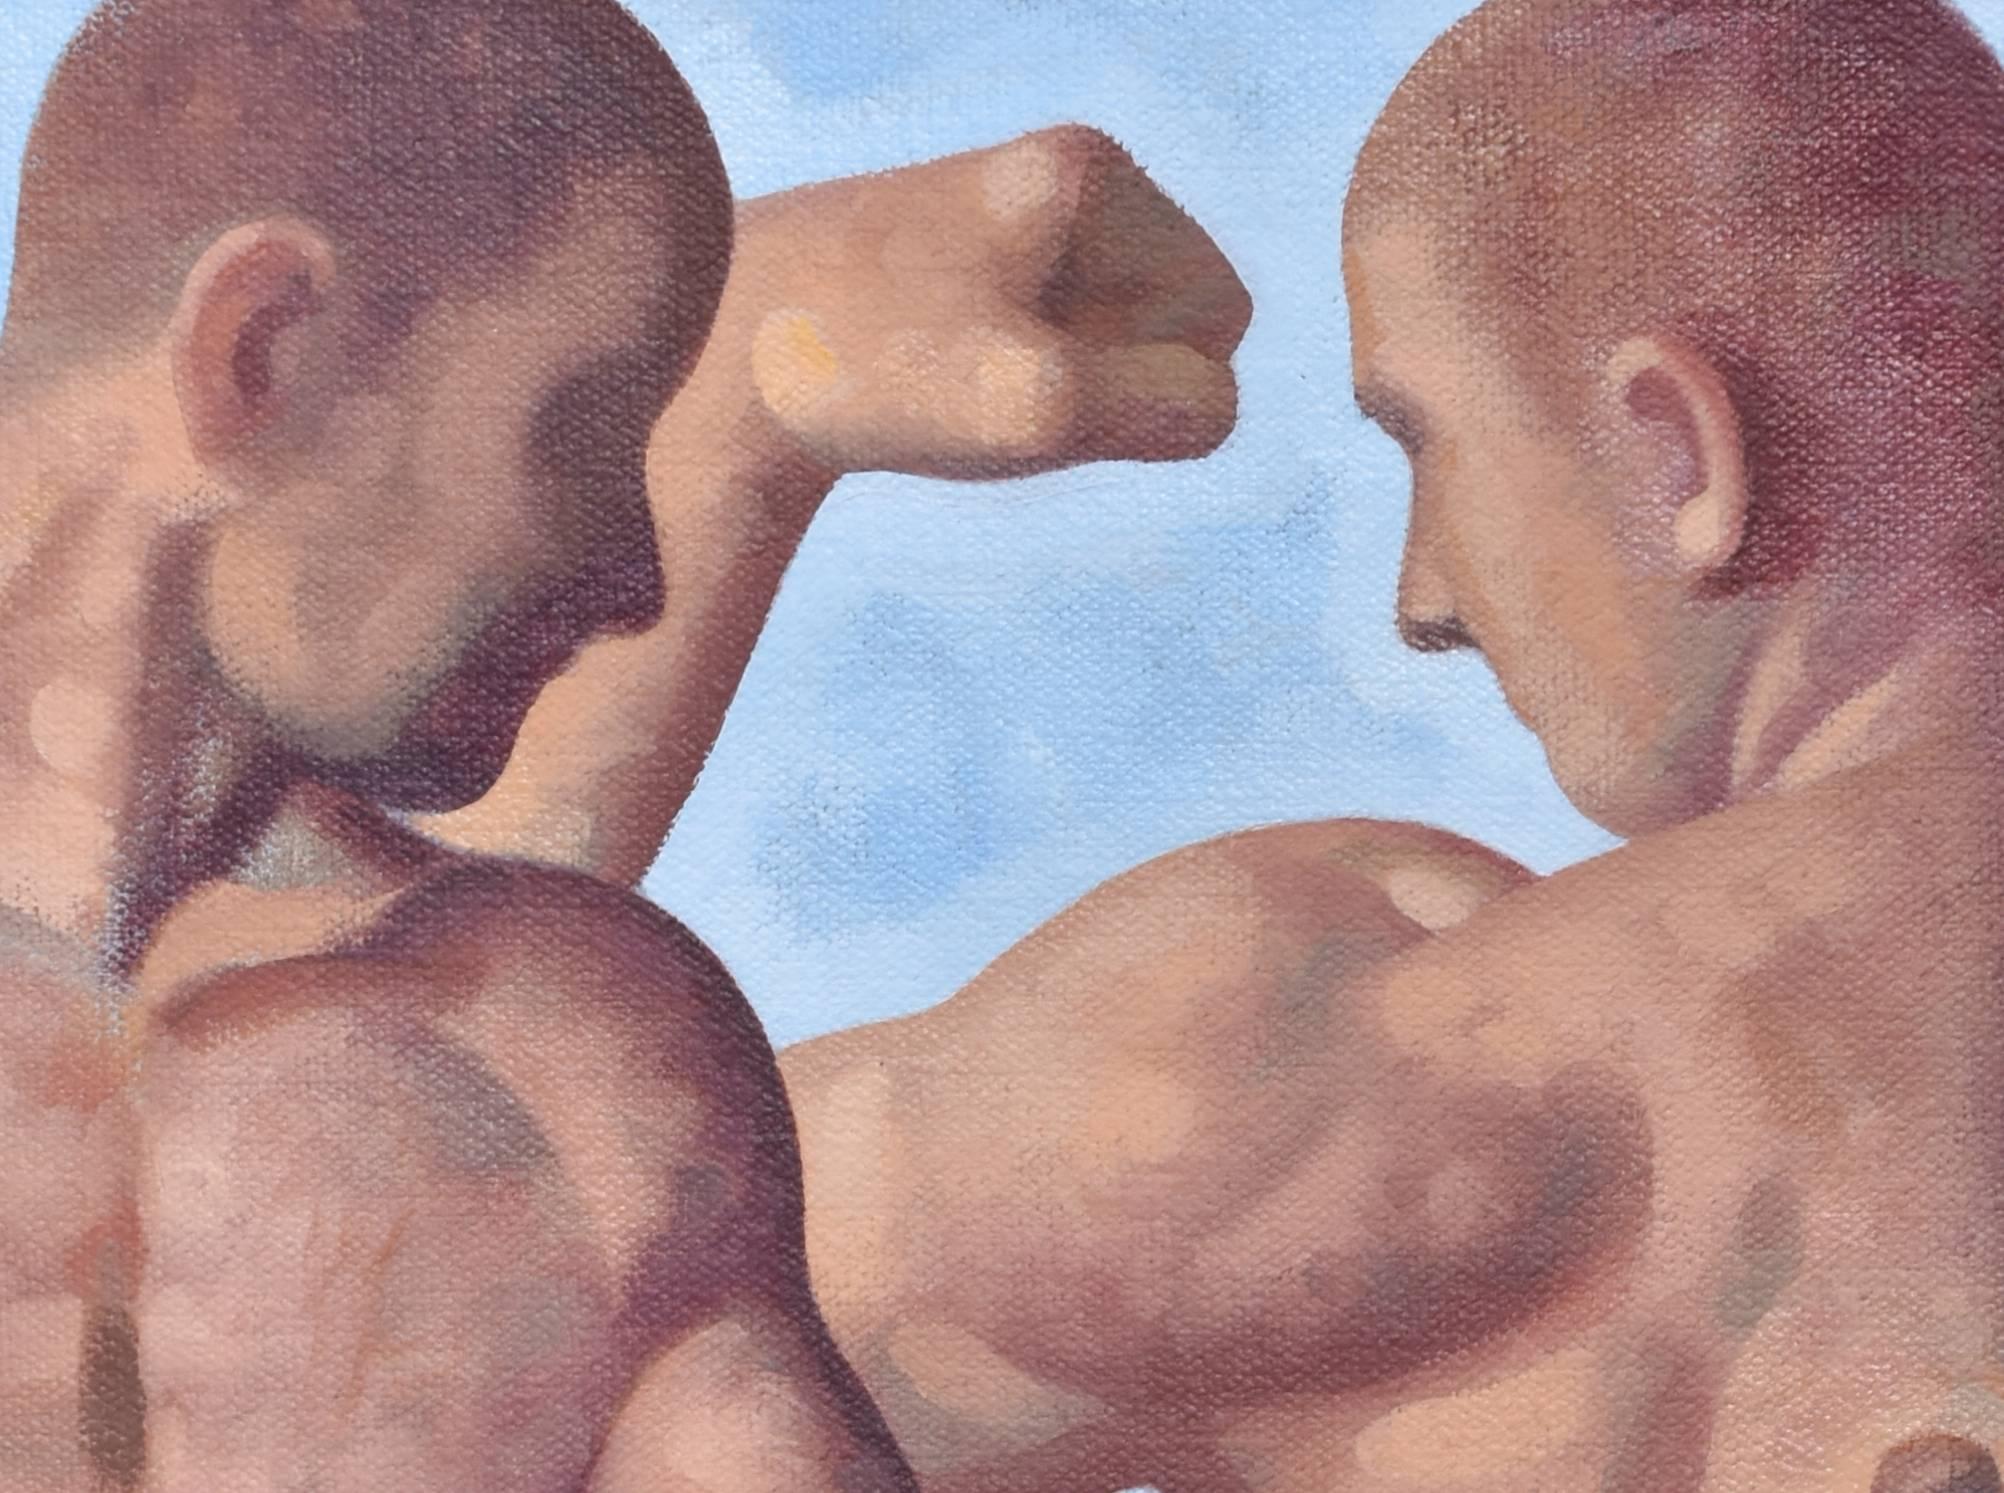 Figurative oil painting of two nude male models on linen board
10 x 8 inches unframed, 13 x 11 x 1.5 inches in black frame

This contemporary figurative painting is one in a series of Anatomy Paintings created by the artist in 2018. Goldstrom